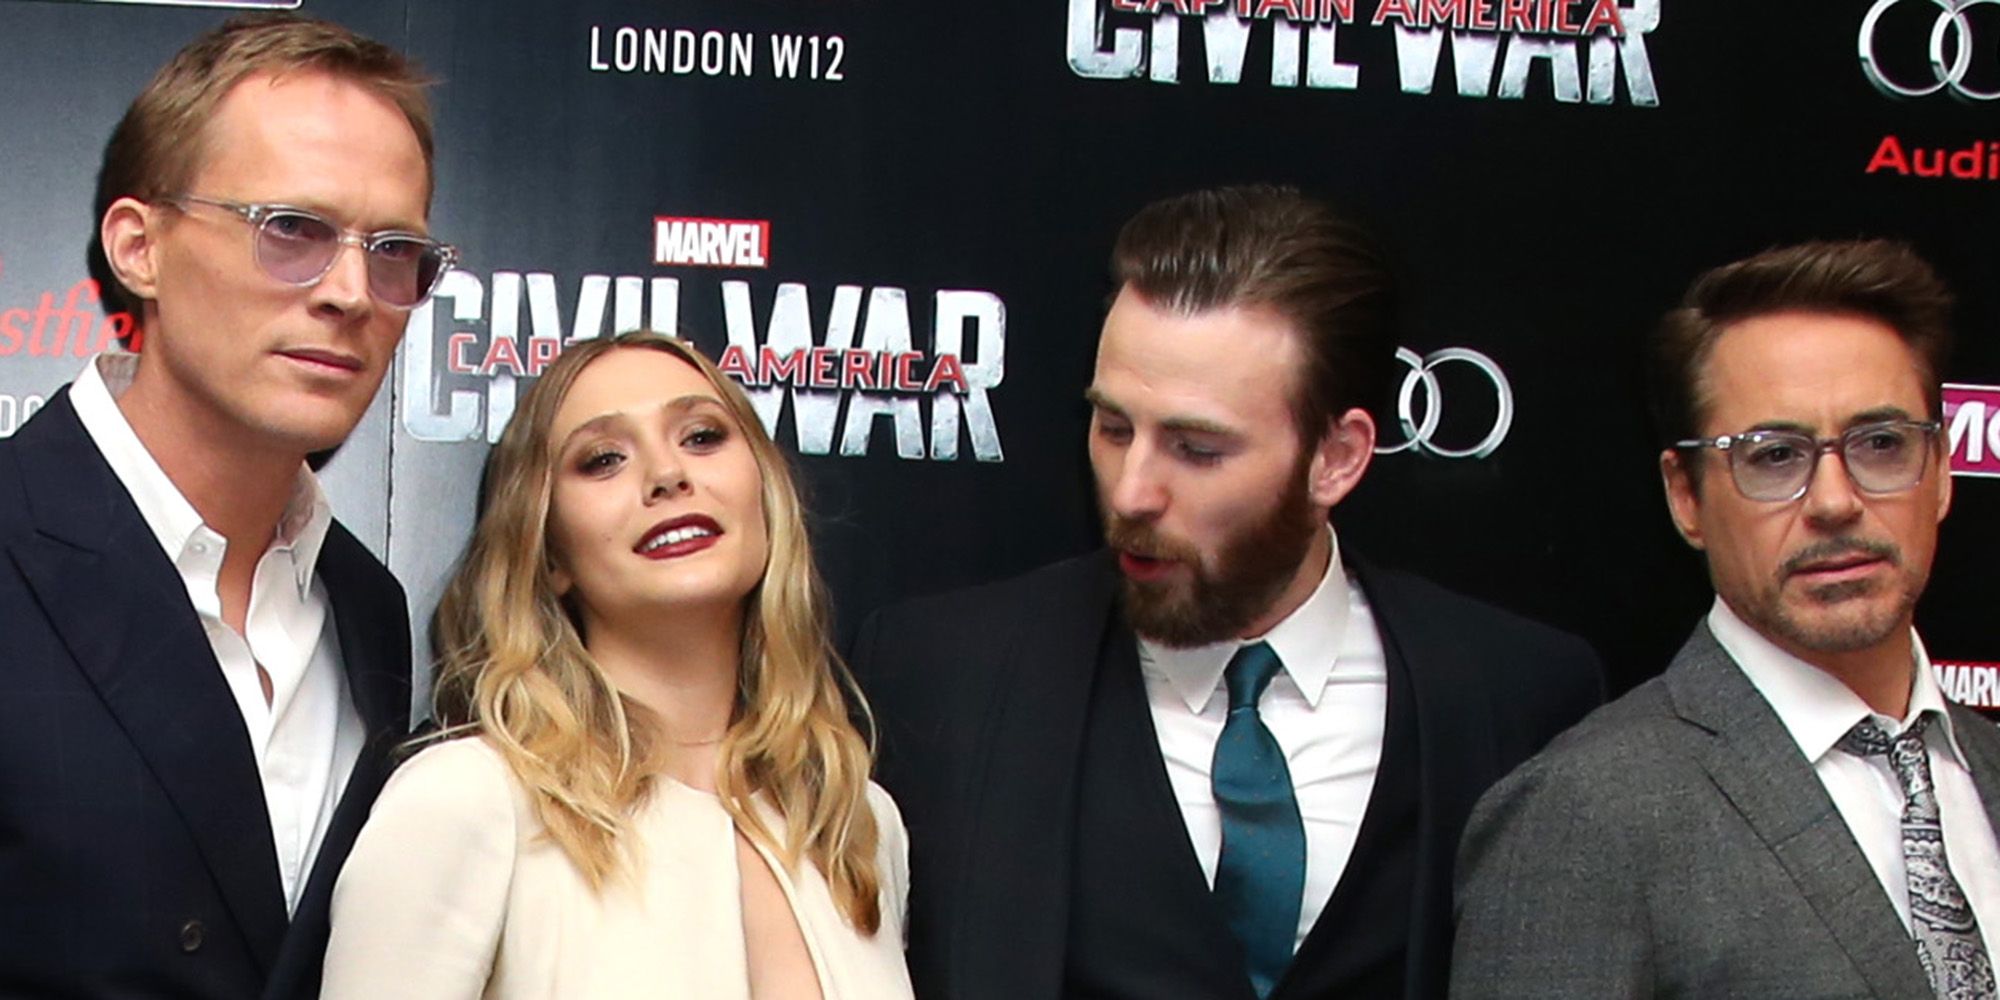 The Exact Moment Chris Evans Discovered Boobs - Chris Evans Staring at Elizabeth  Olsen Cleavage